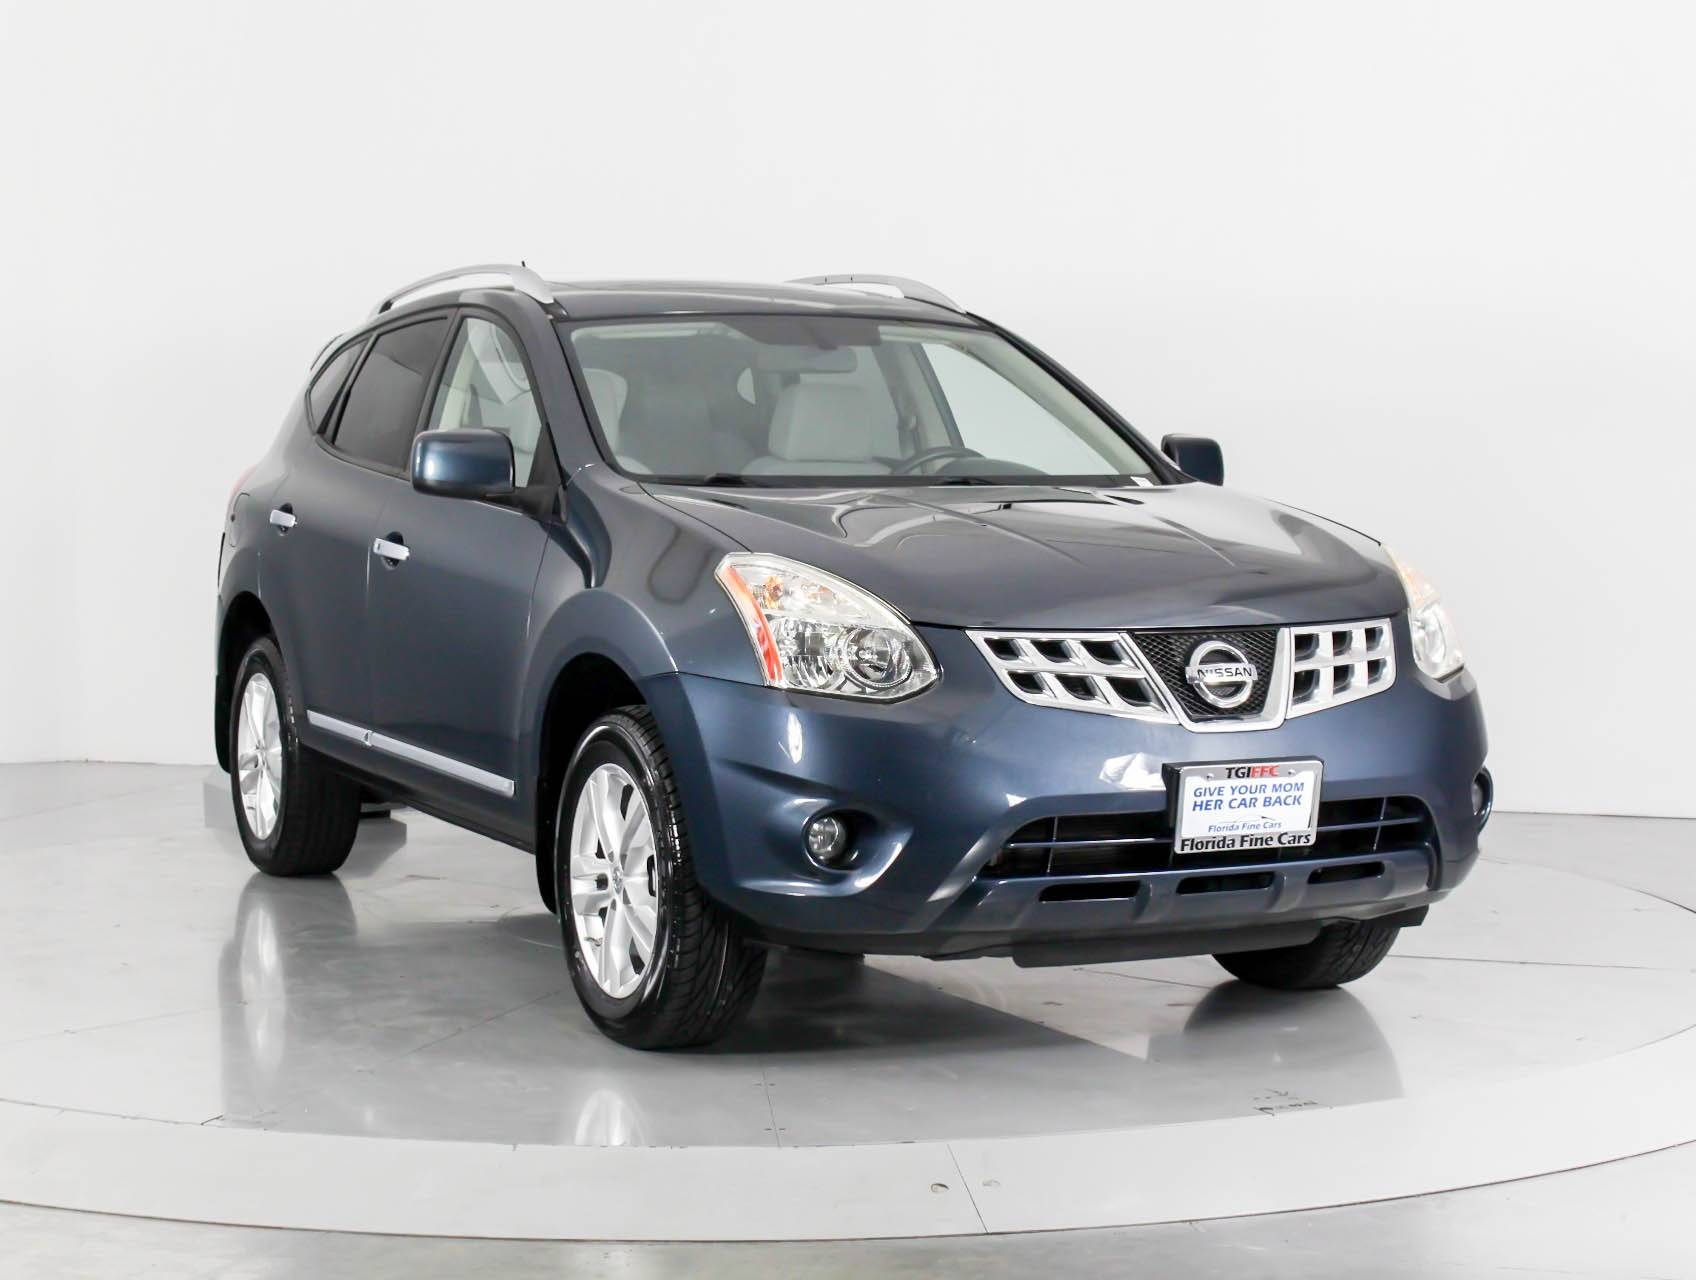 Florida Fine Cars - Used NISSAN ROGUE 2013 WEST PALM Sv